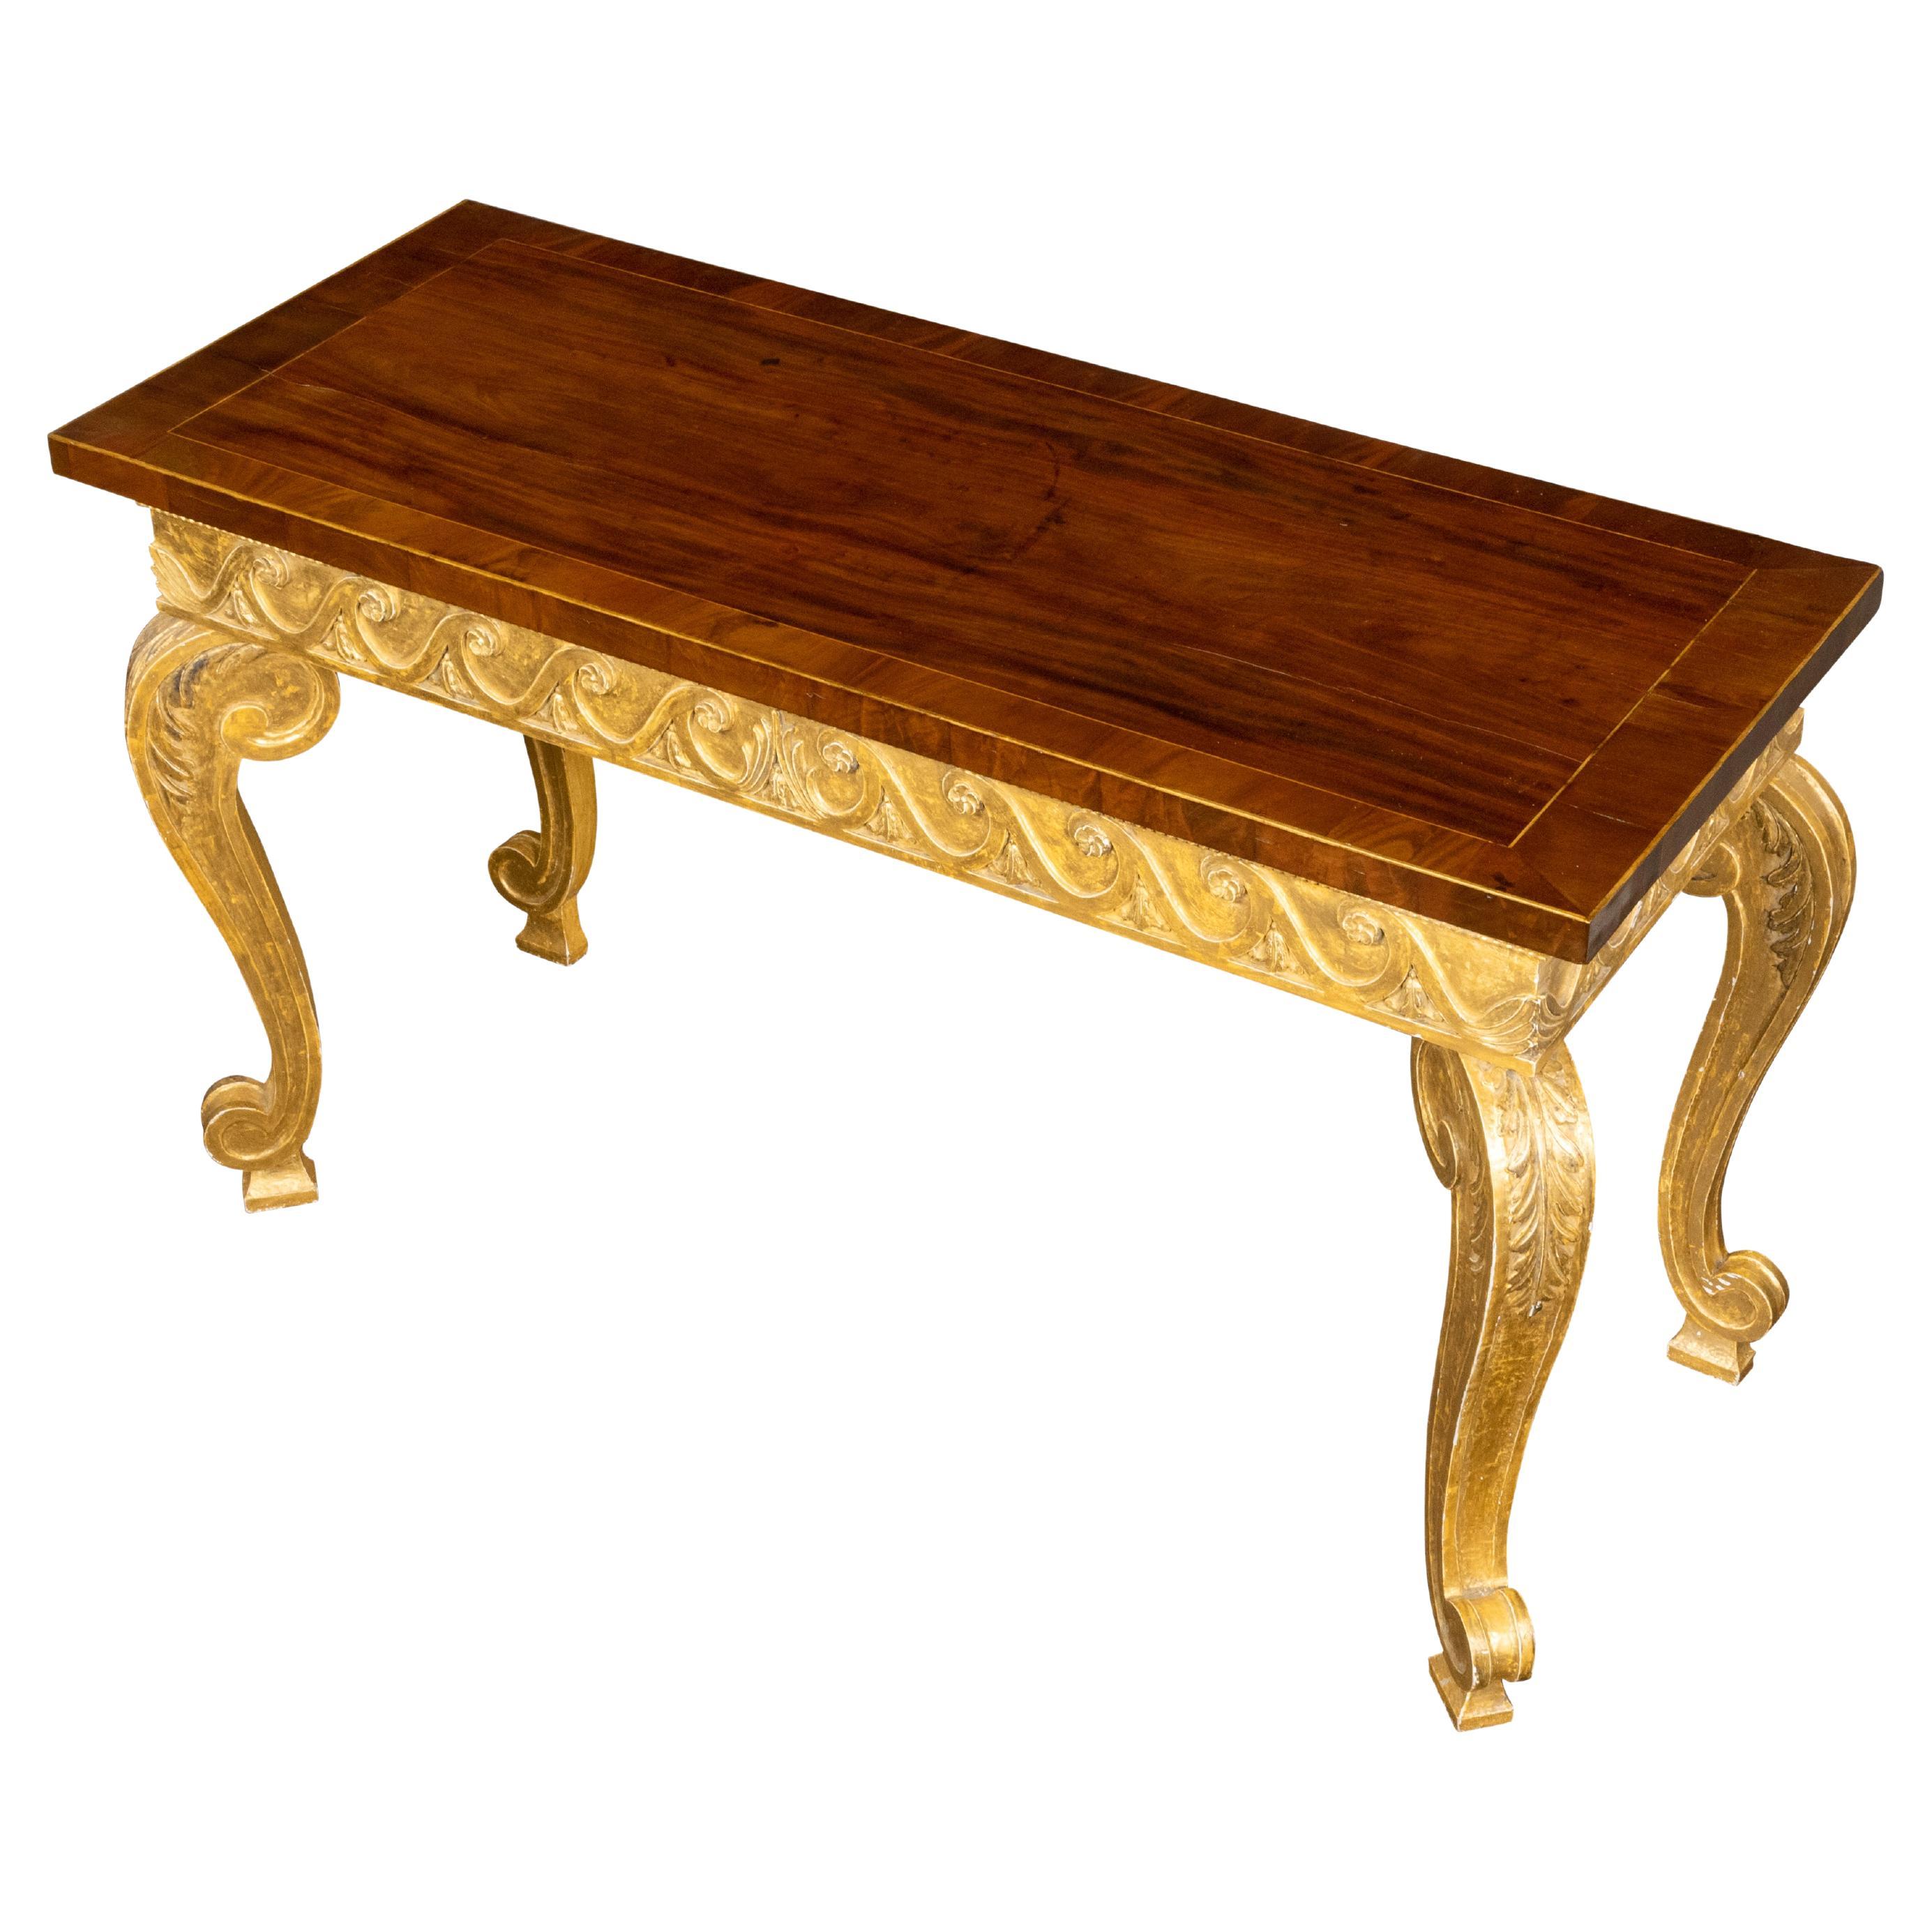 English 1800s Giltwood Console Table with Mahogany Top and Vitruvian Scrolls For Sale